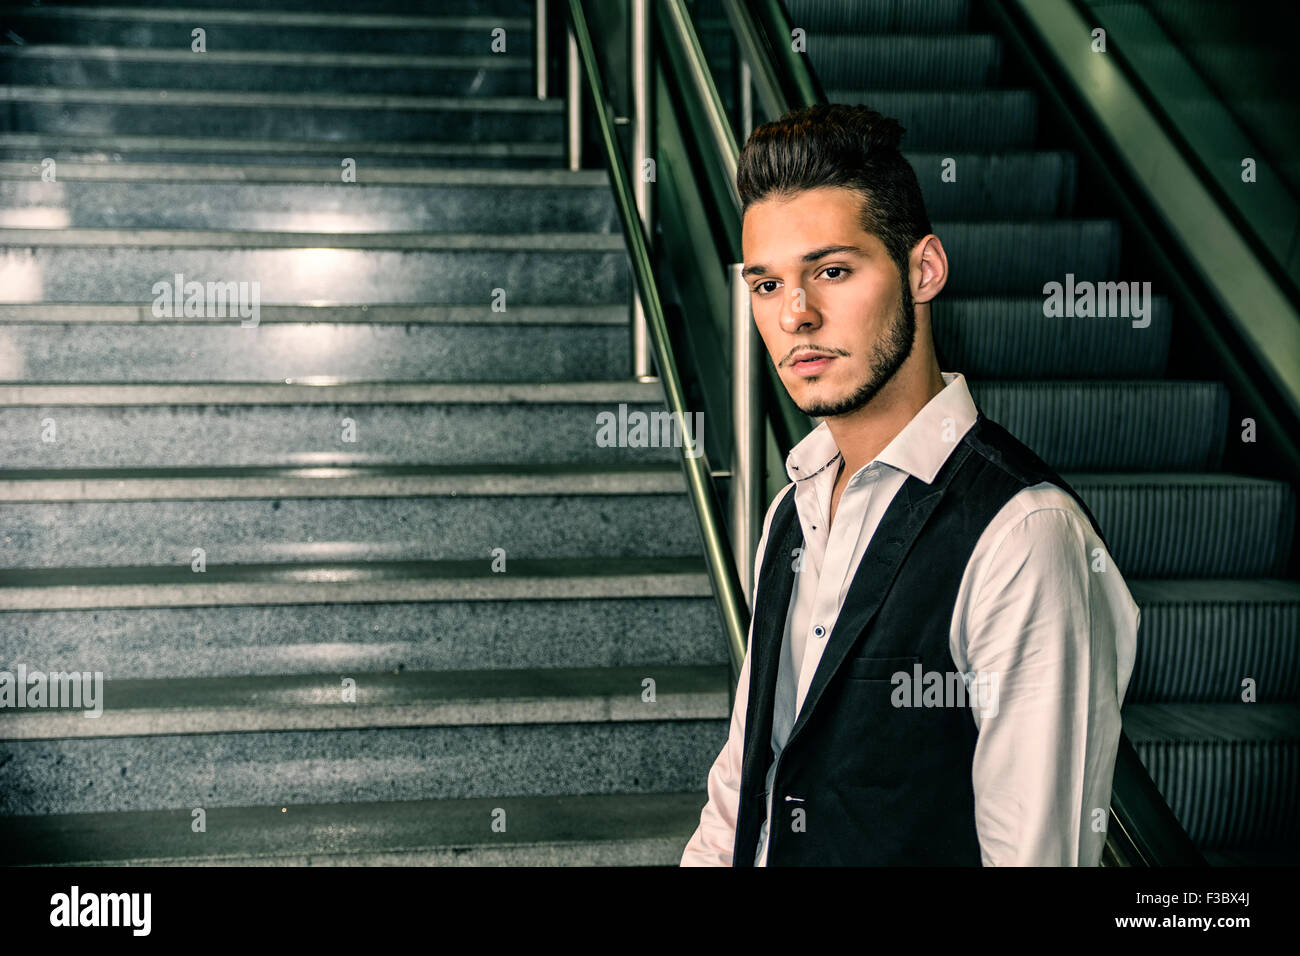 Profile shot of handsome young man inside train station looking at camera Stock Photo